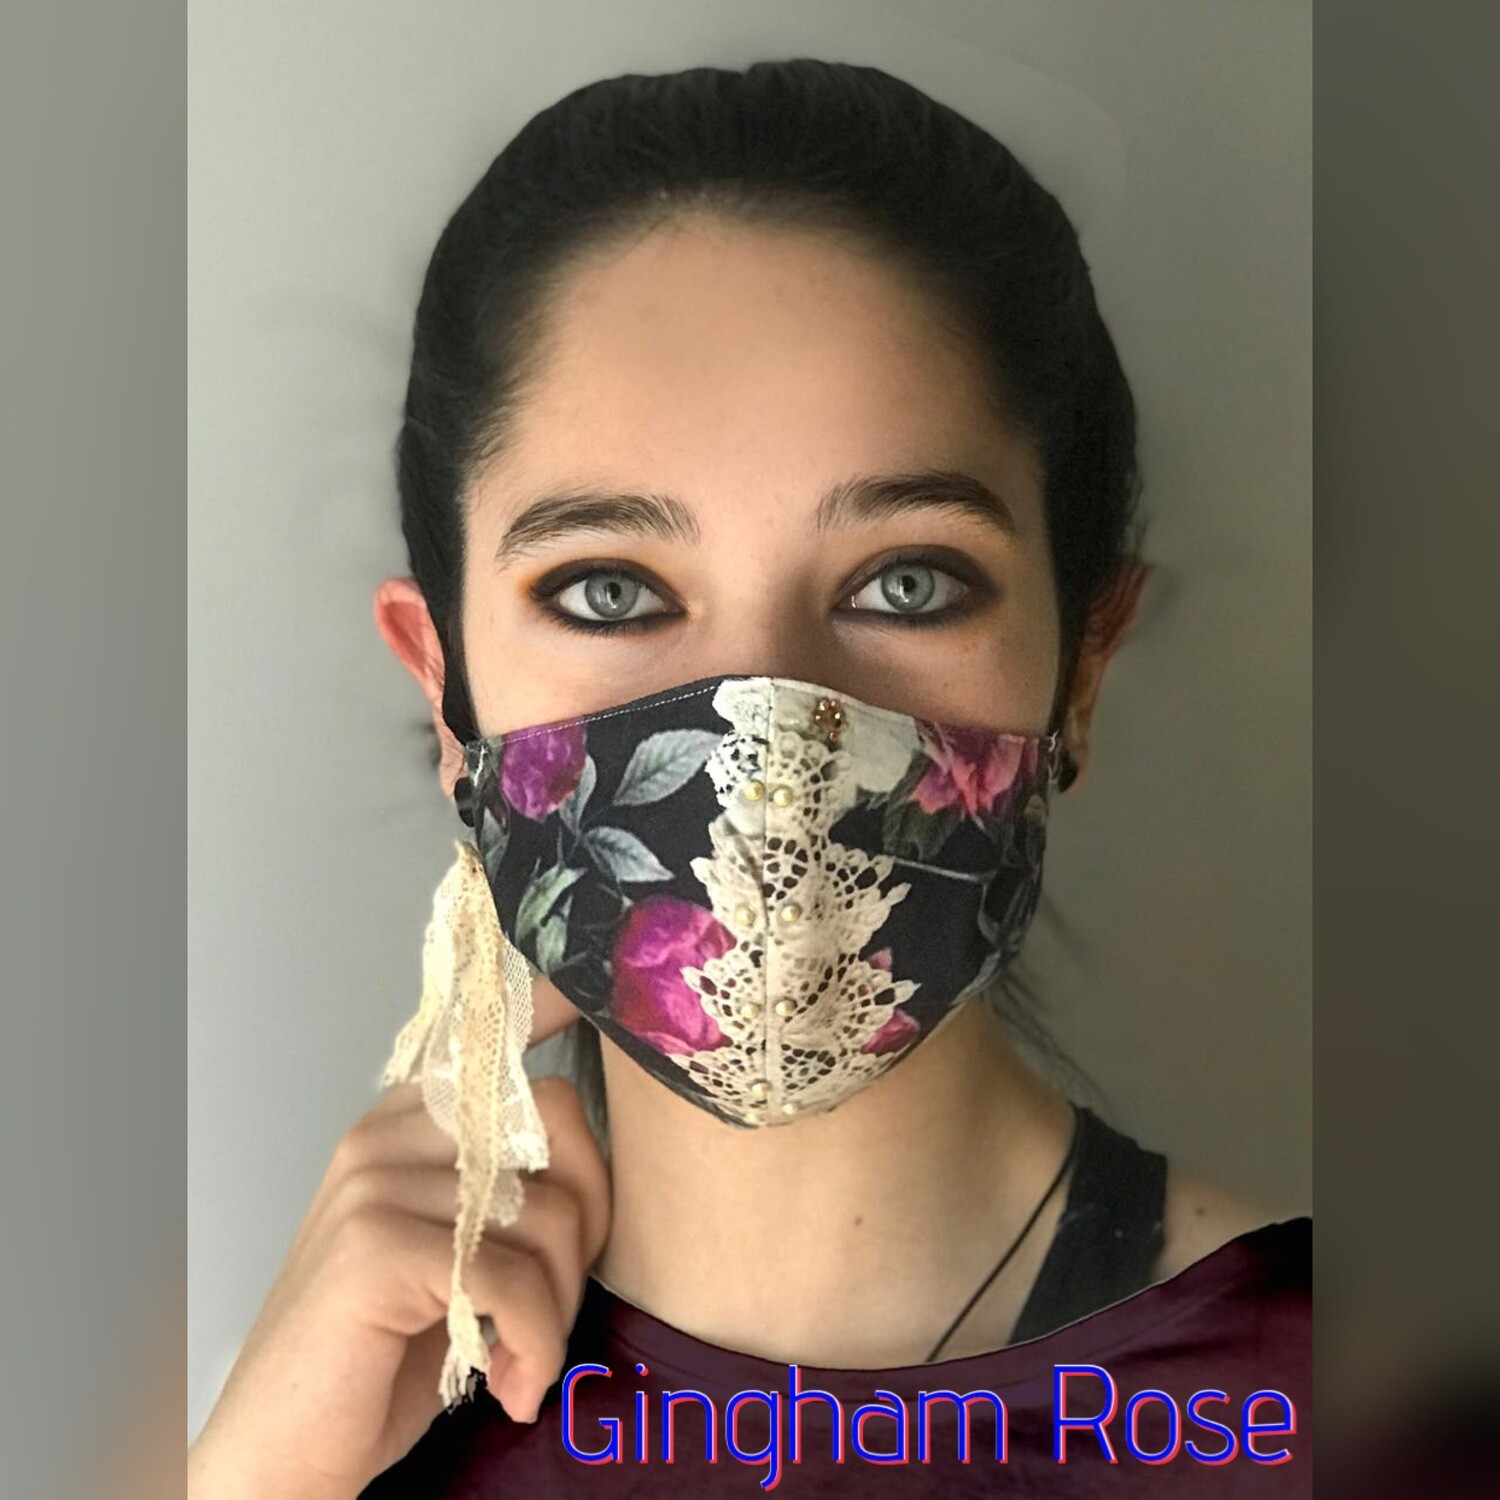 IPNG: Gingham Rose Fairytale Mask